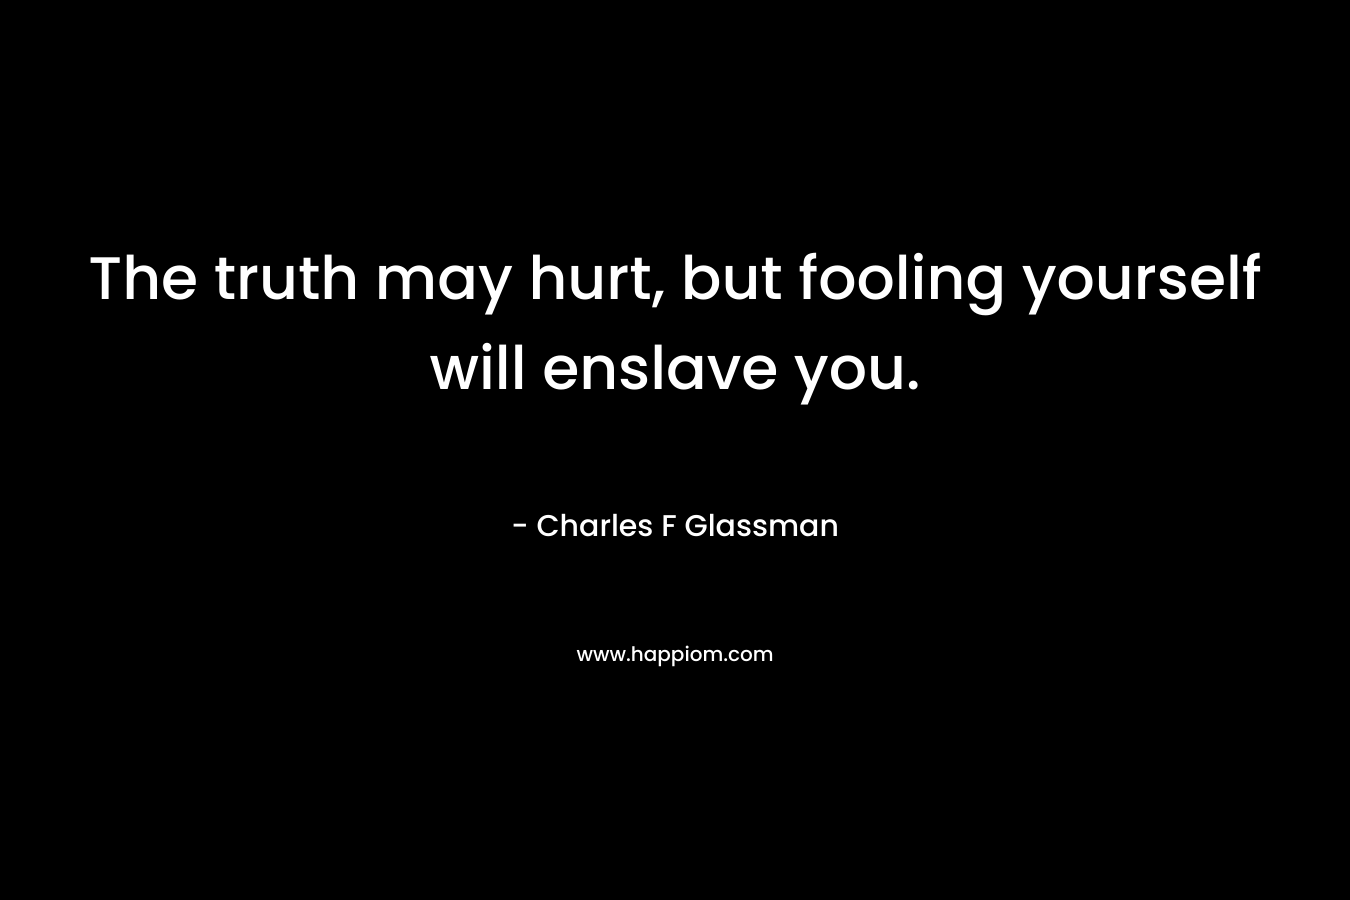 The truth may hurt, but fooling yourself will enslave you.